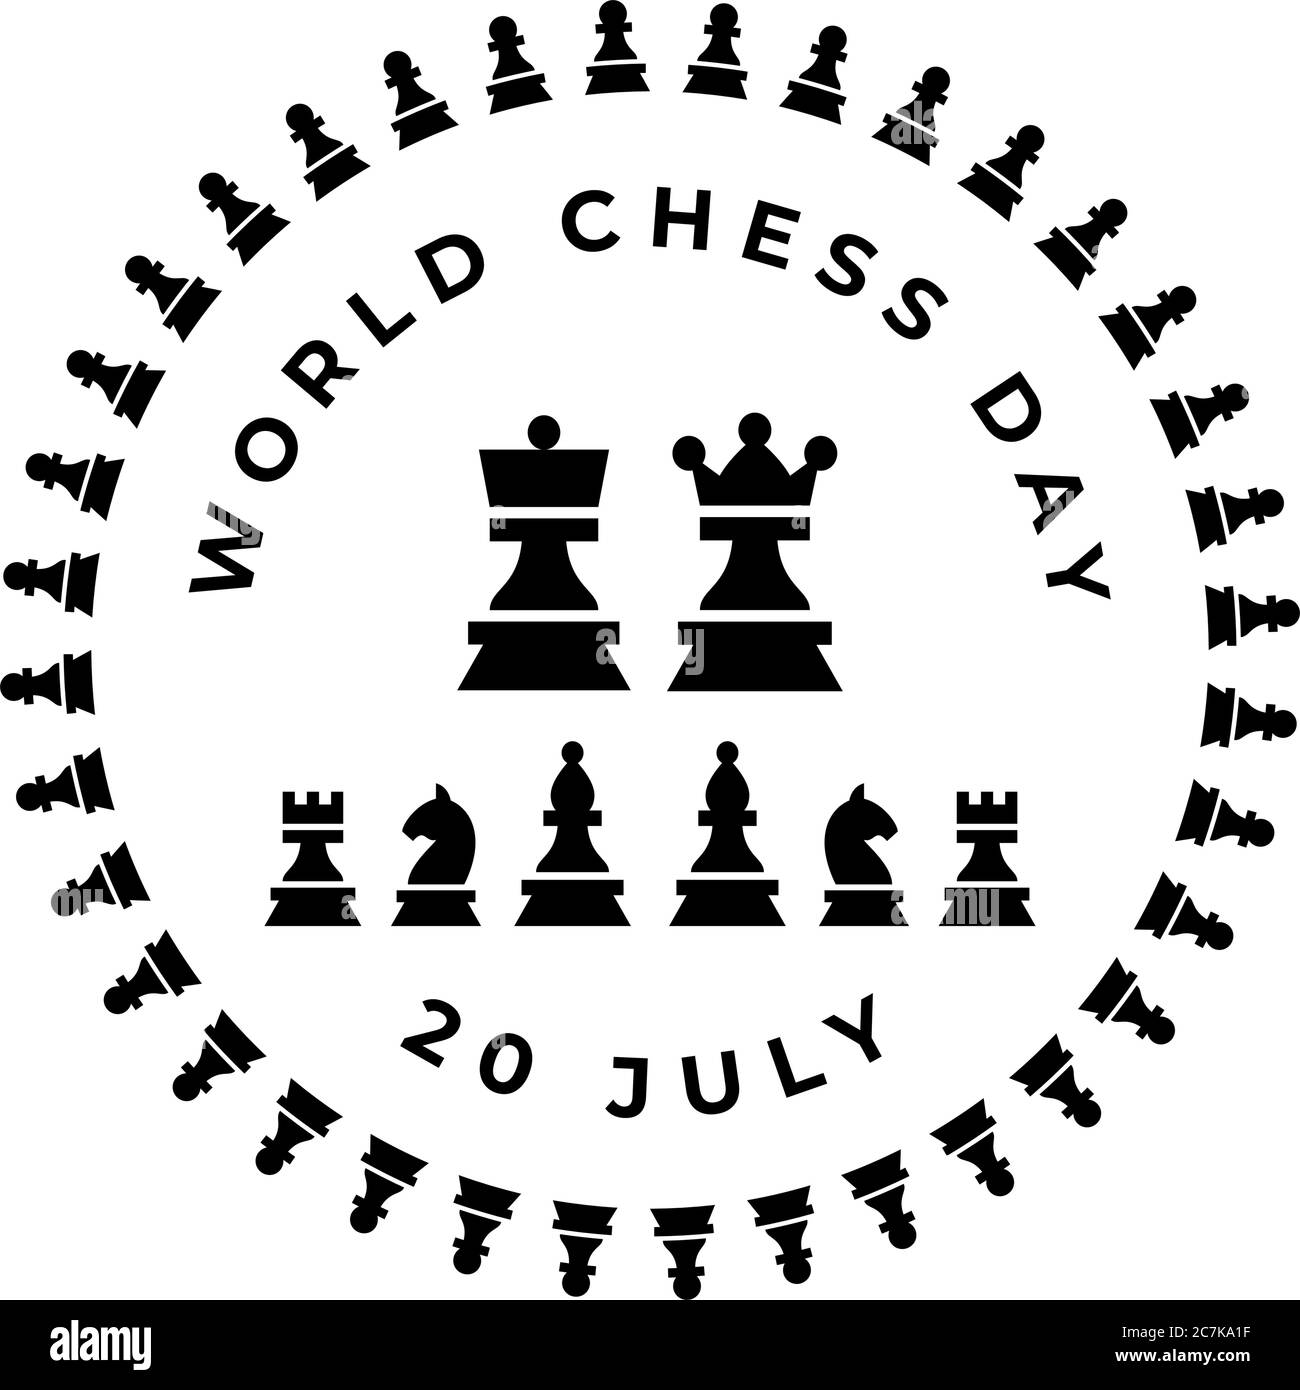 Vector illustration about chess tournament, match, game. Use as advertising, invitation, banner, poster. International Chess Day. Stock Vector